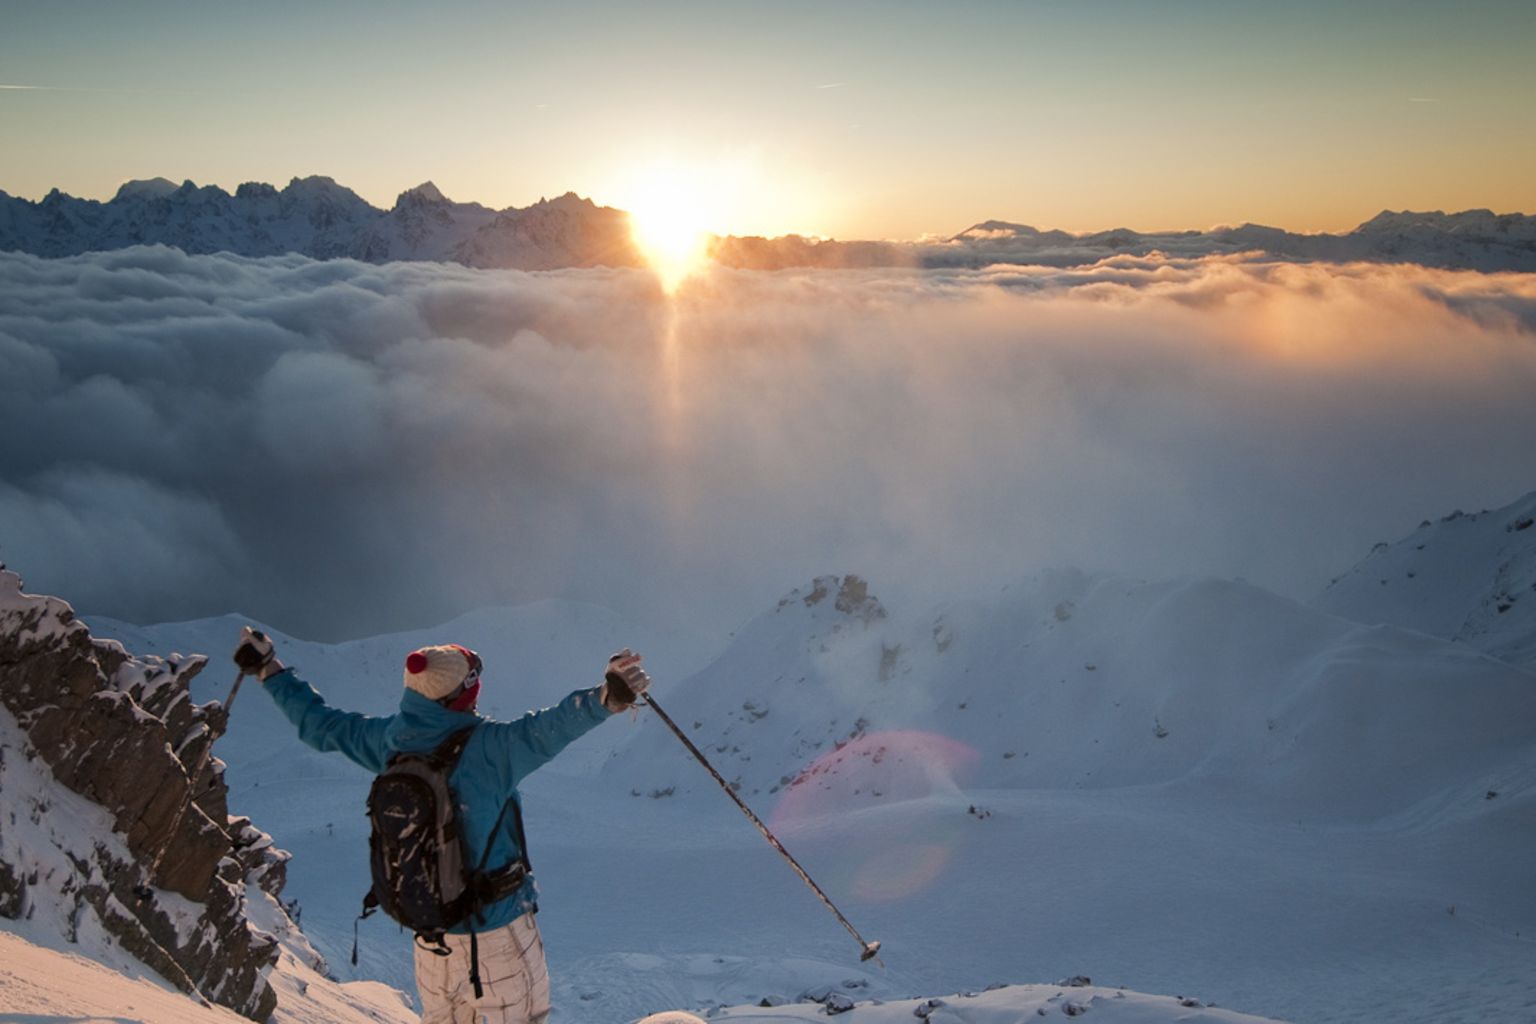 EPIC EUROPE is an integrated adventure travel operator based in the Alps that caters to the high-end experiential traveler, doing so in a socially, culturally, and environmentally responsible manner, Valais